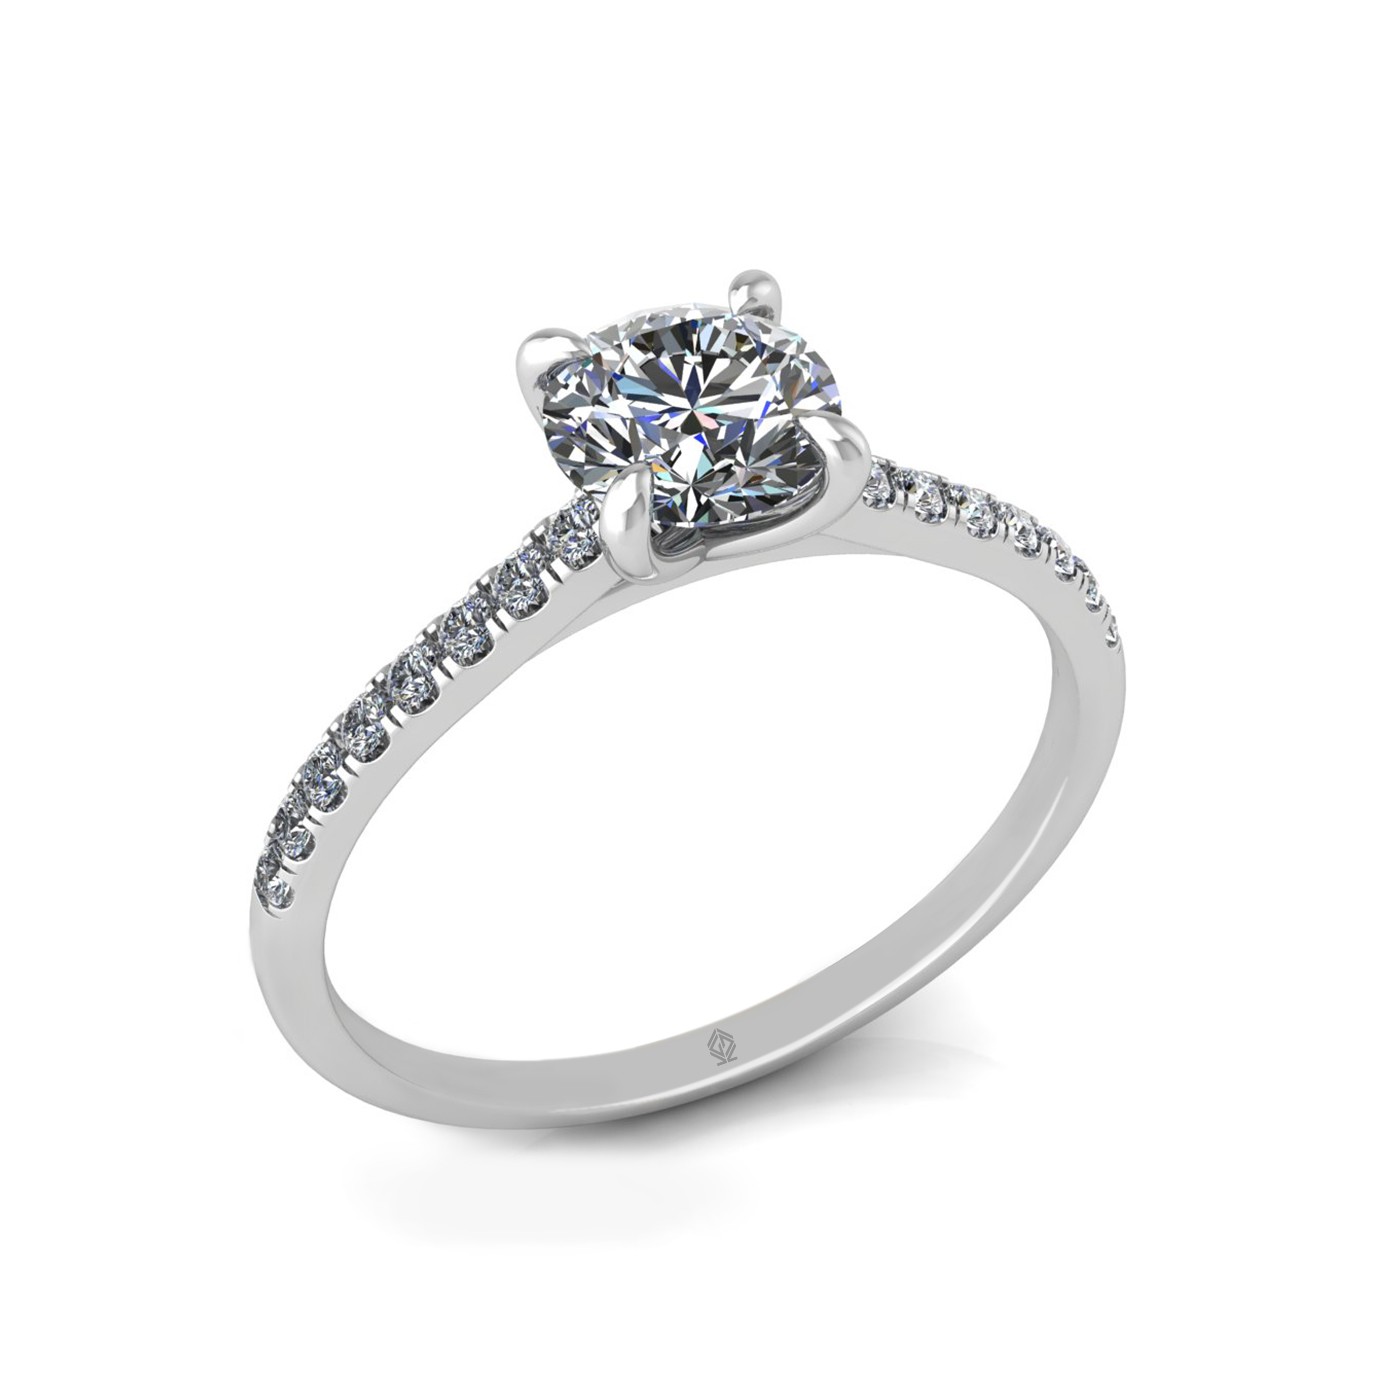 18k white gold 1.0ct 4 prongs round cut diamond engagement ring with whisper thin pavÉ set band